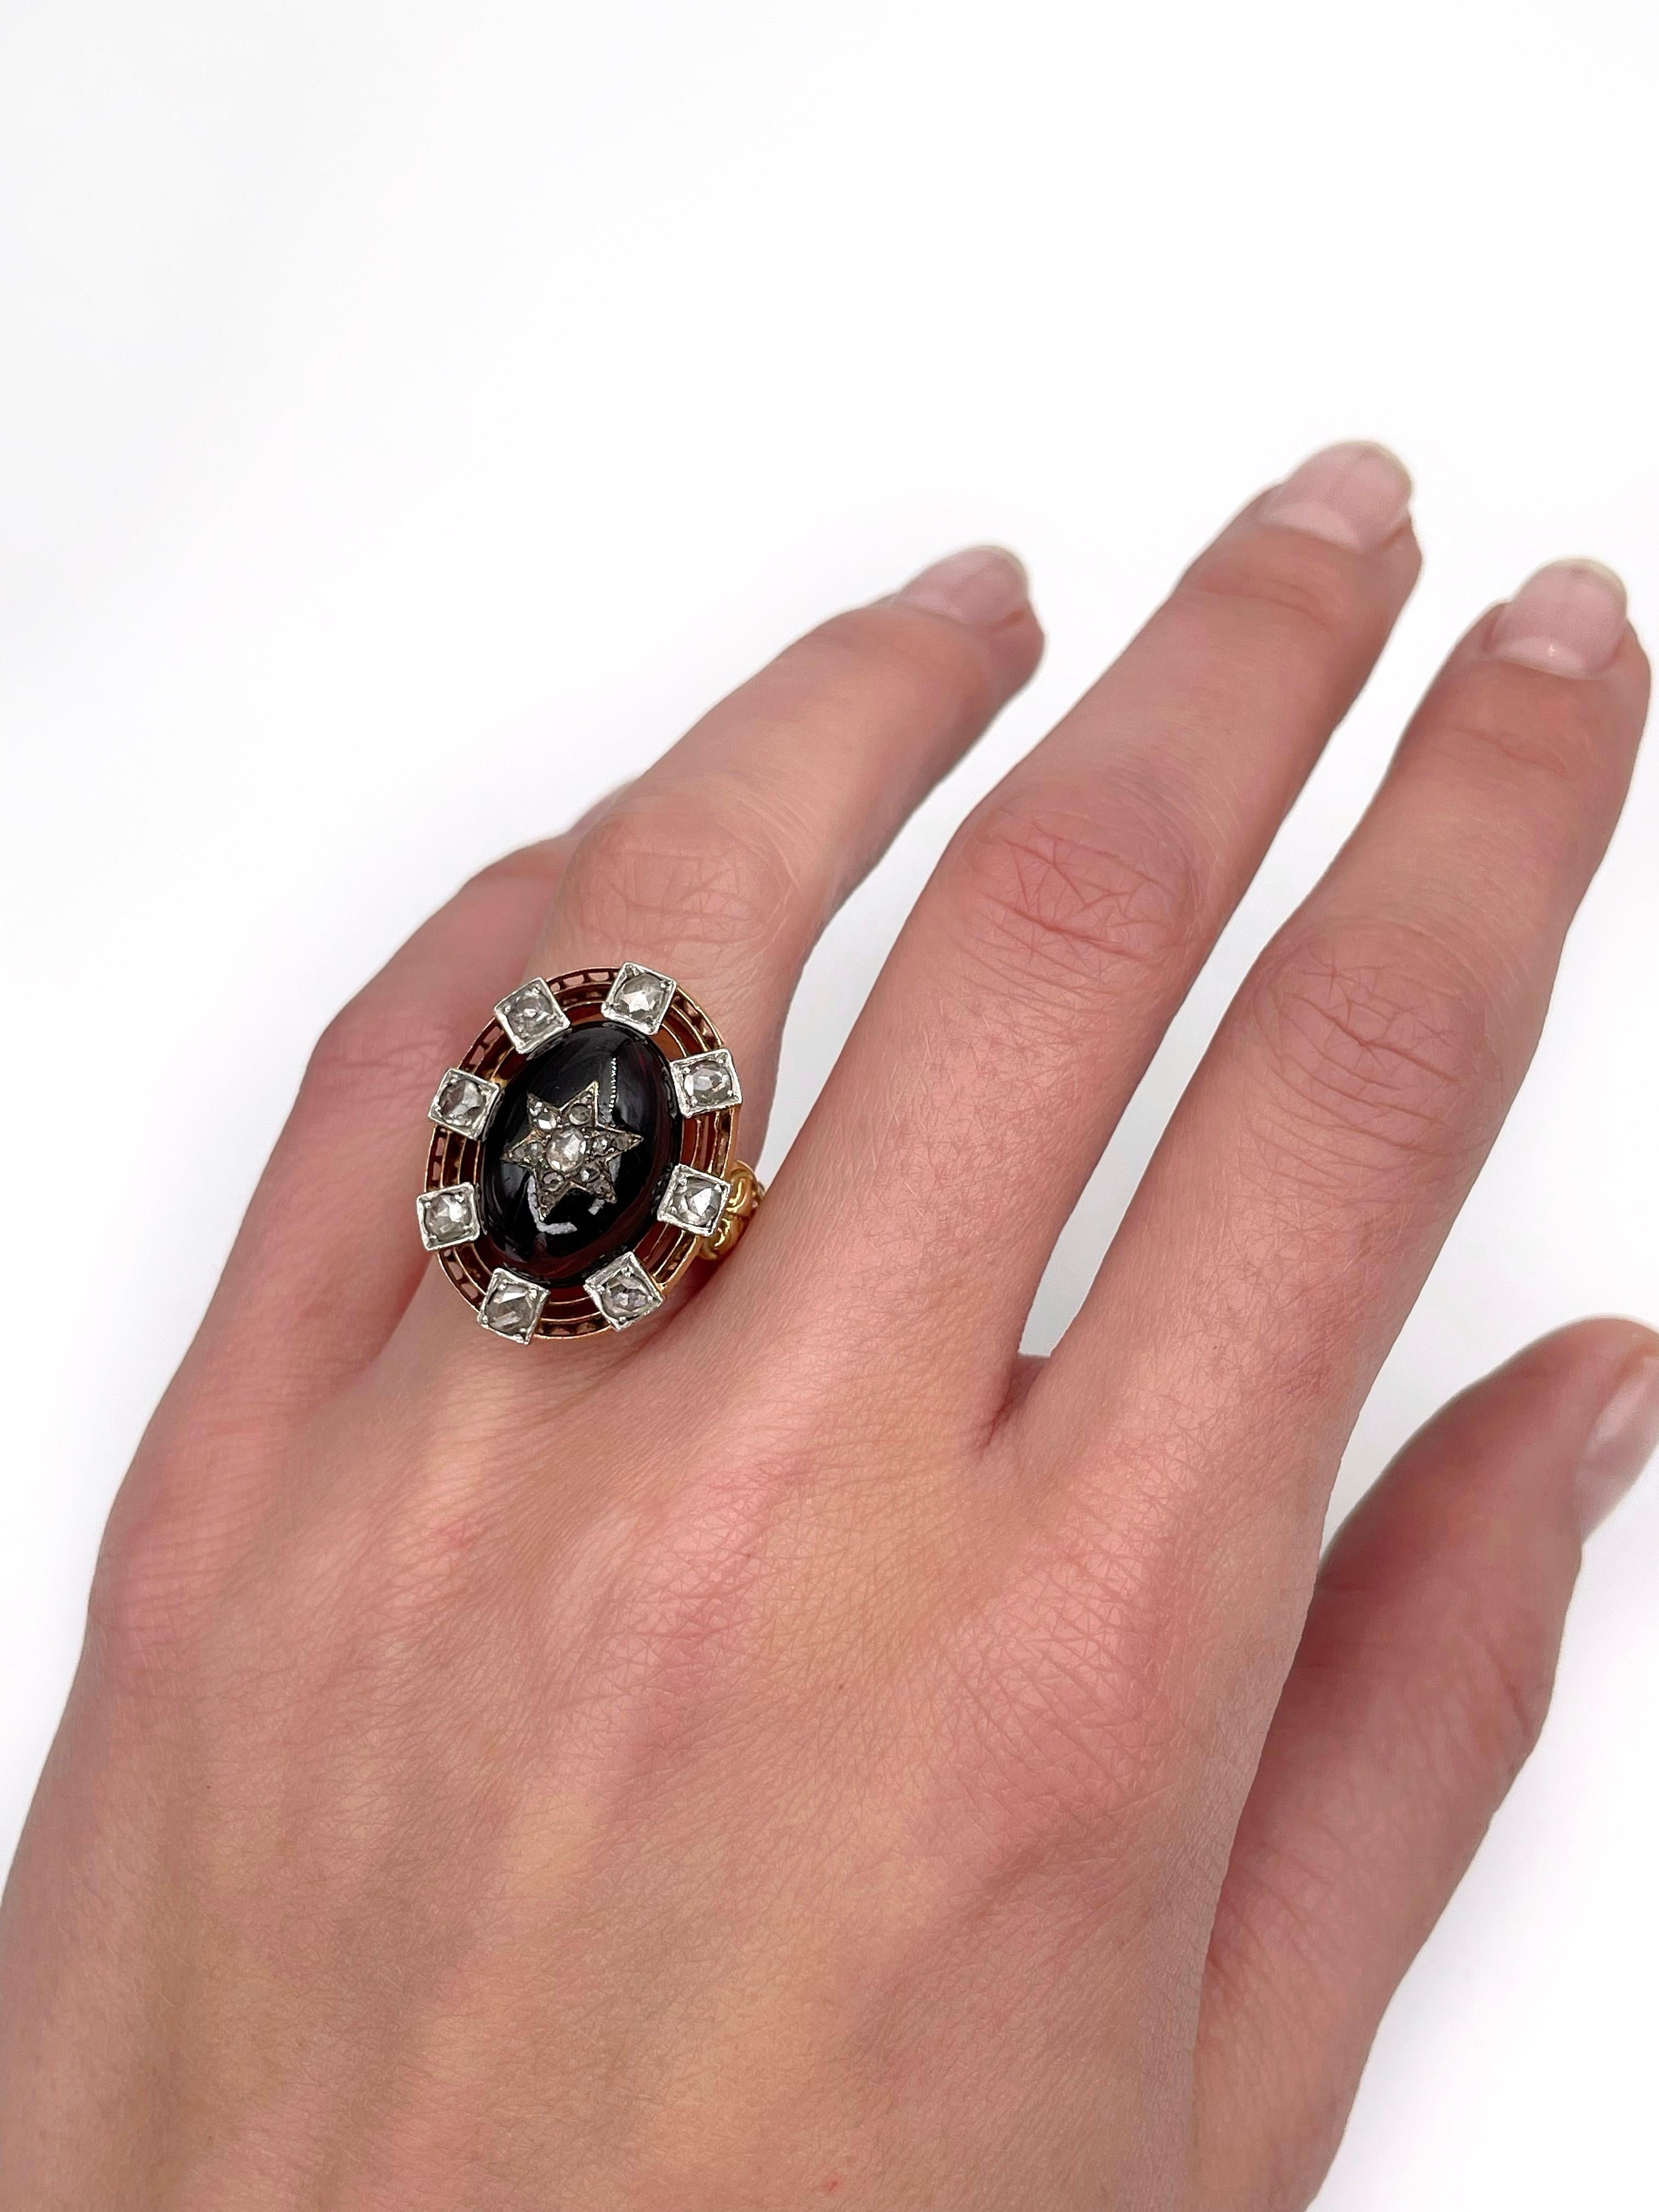 This is a stunning Victorian star ring crafted in 18K gold. Circa 1870. It features beautiful purple red  oval cabochon cut garnet and rose cut diamonds of various sizes. 

Weight: 8.29g 
Size: 15.5 (US 4.75)

IMPORTANT: please ask about the